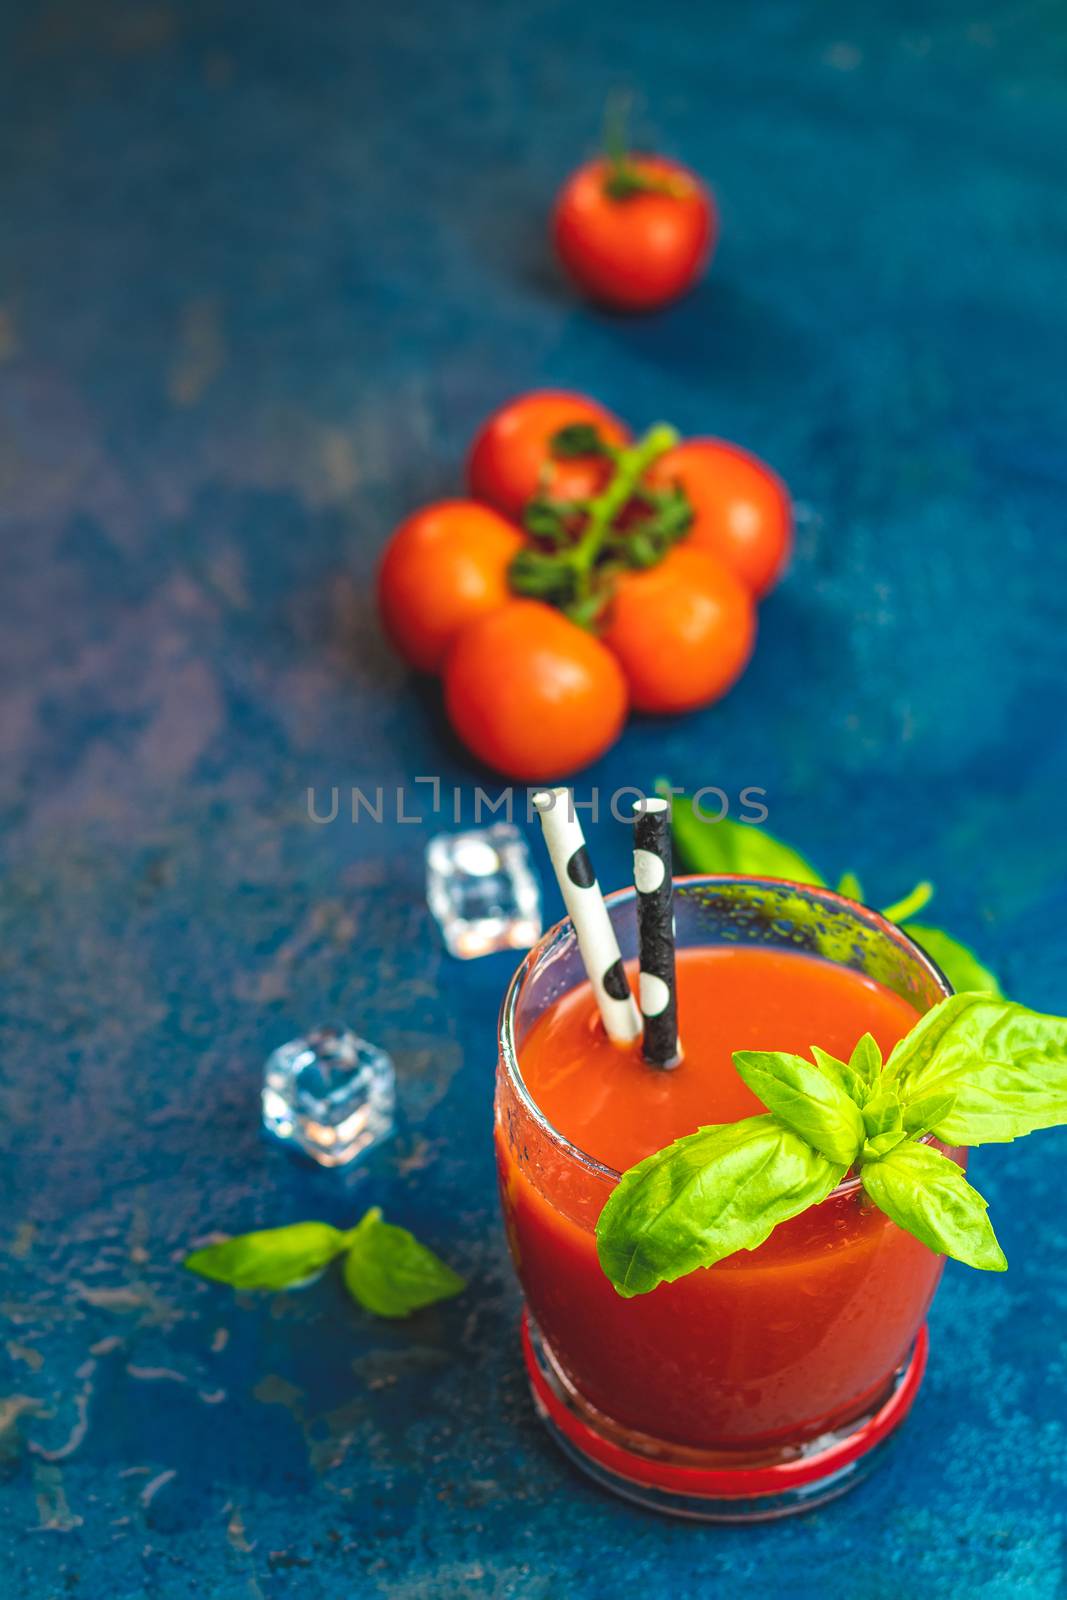 Tomato juice, red cocktail with tomato juice between tomatoes, fresh basil and ice. Delicious tomato bloody mary cocktail on dark blue concrete table.